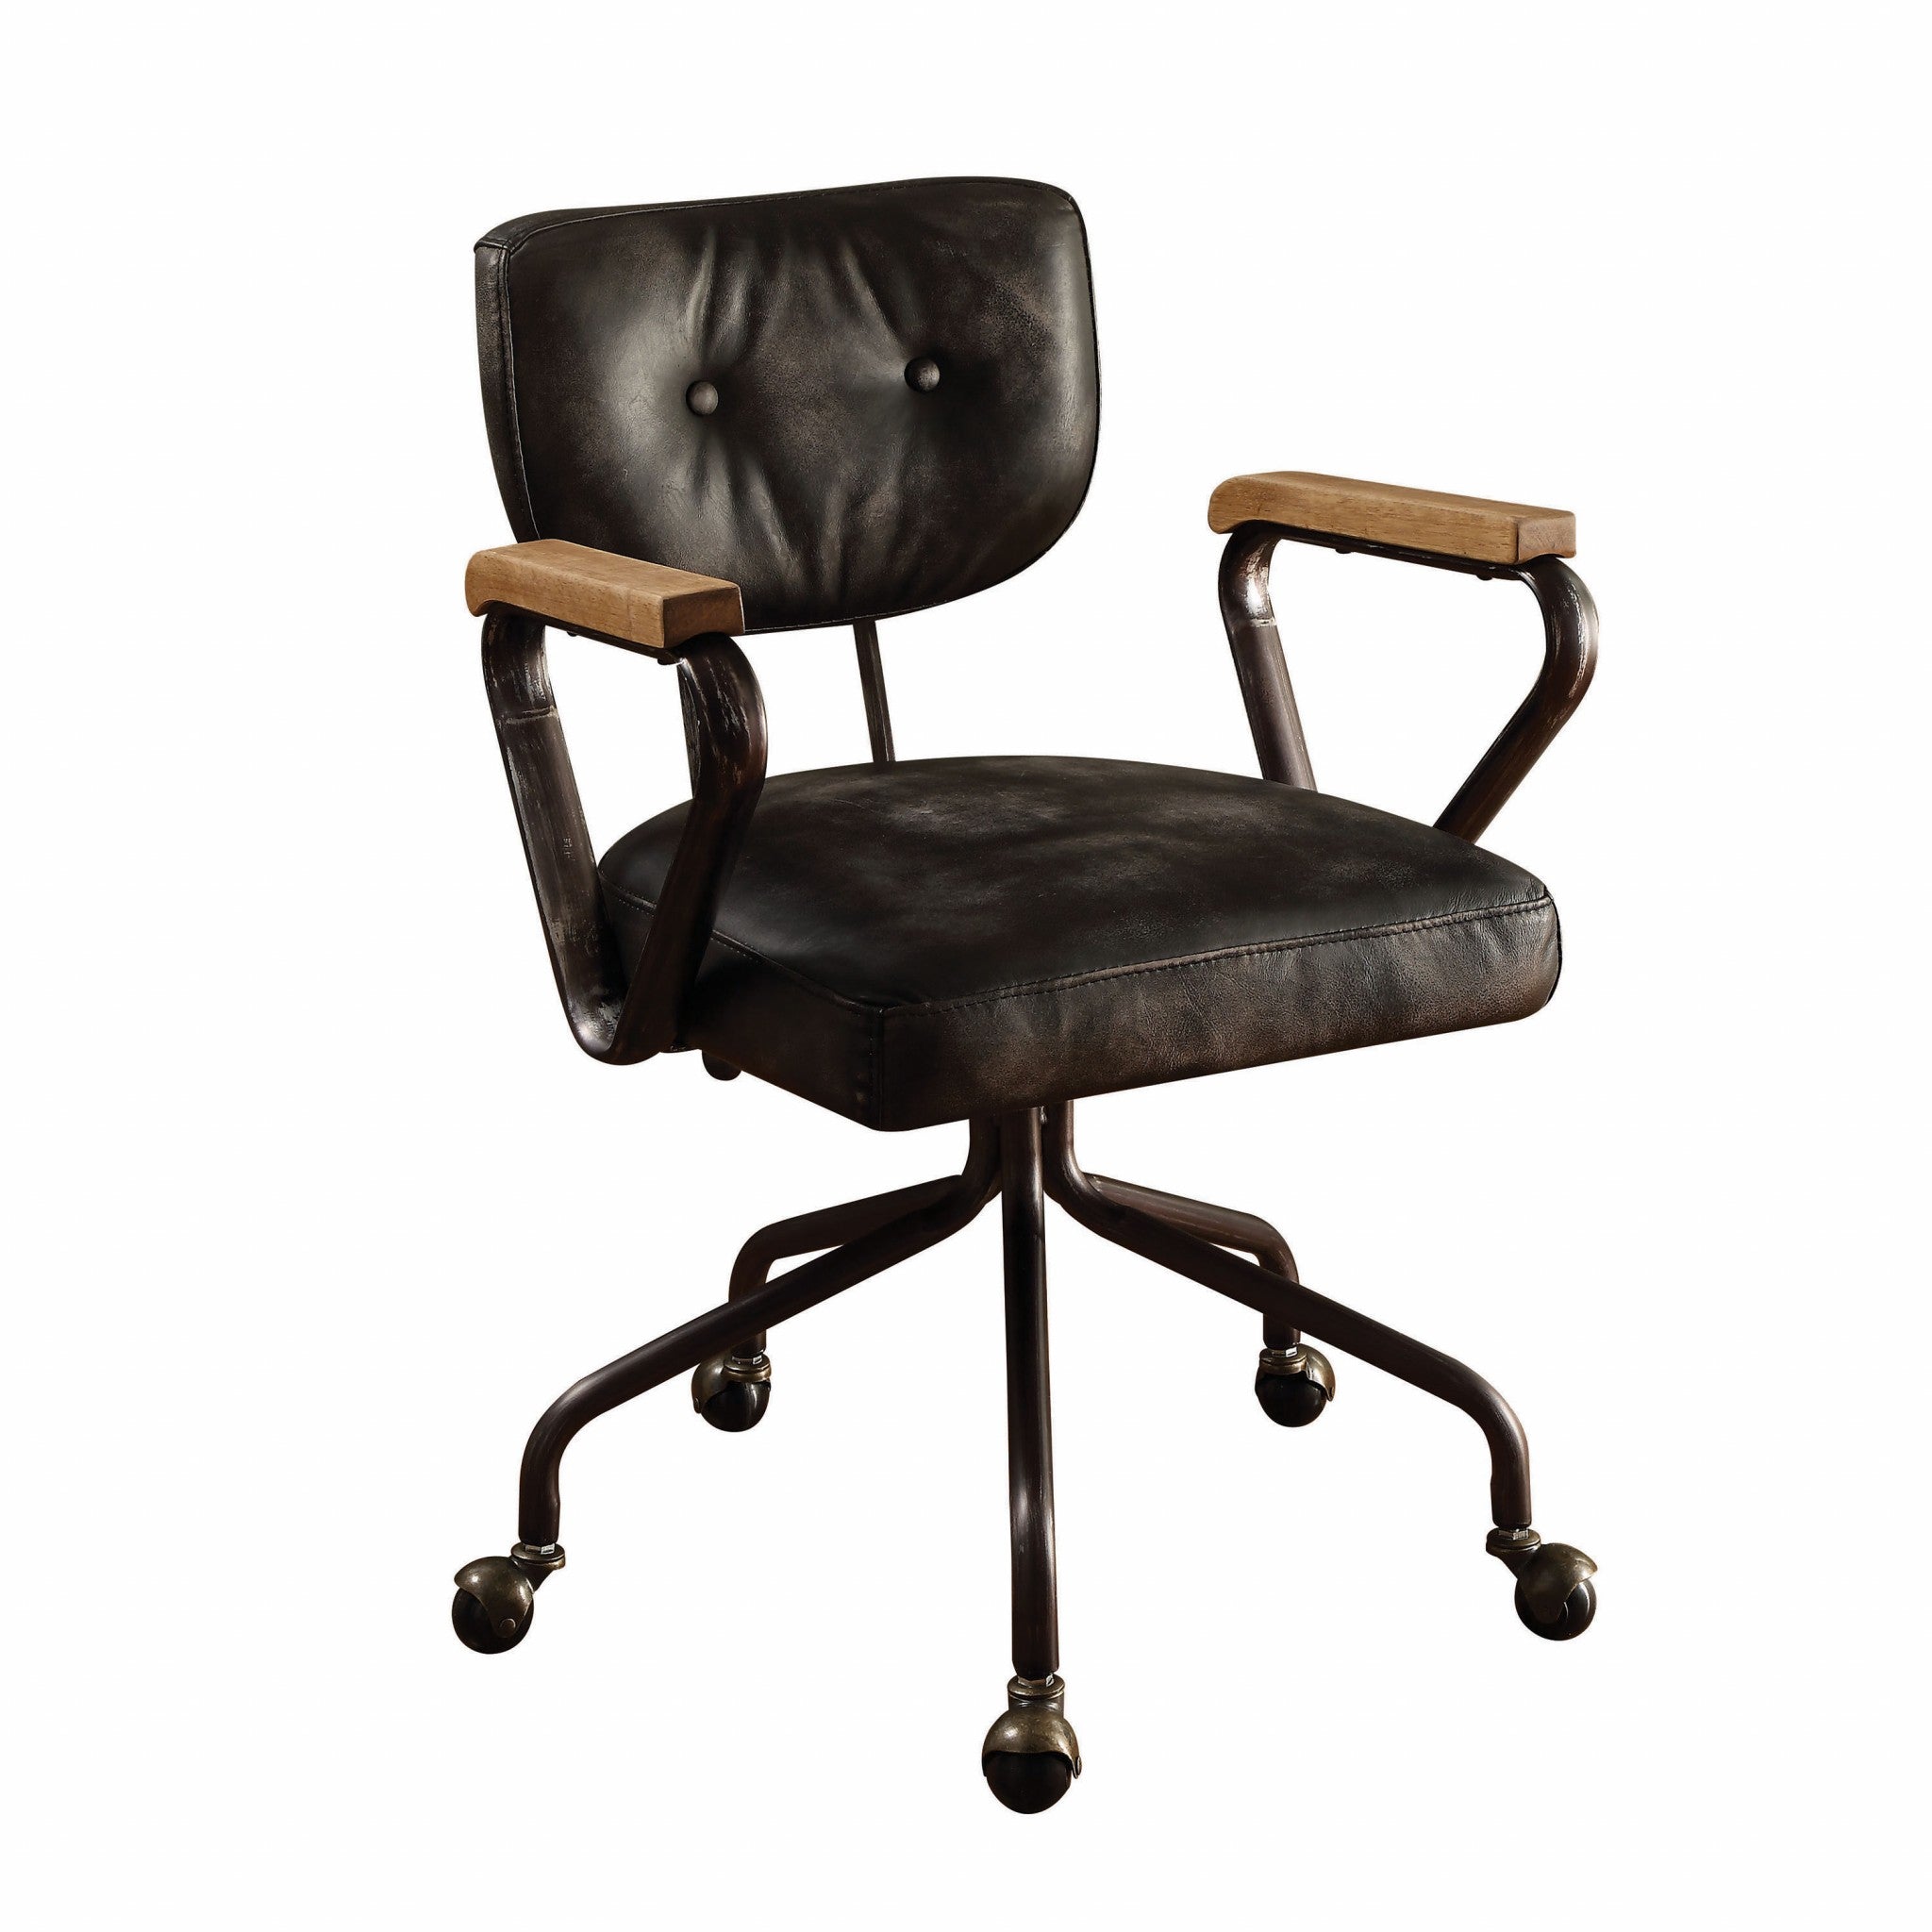 Black-Faux-Leather-Tufted-Seat-Swivel-Adjustable-Task-Chair-Leather-Back-Steel-Frame-Office-Chairs